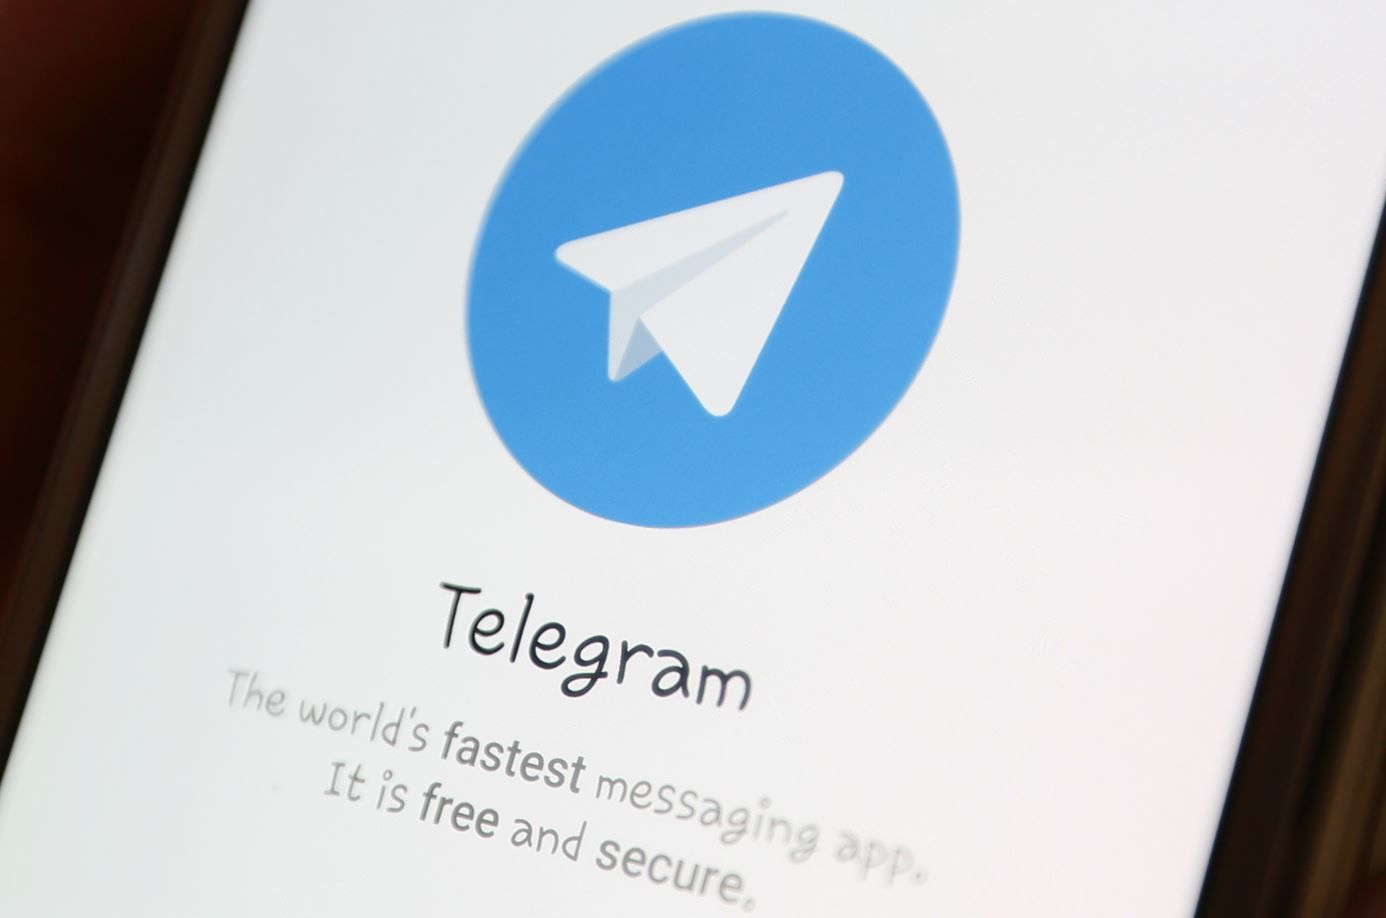 Telegram plans to provide a premium paid version with more capabilities